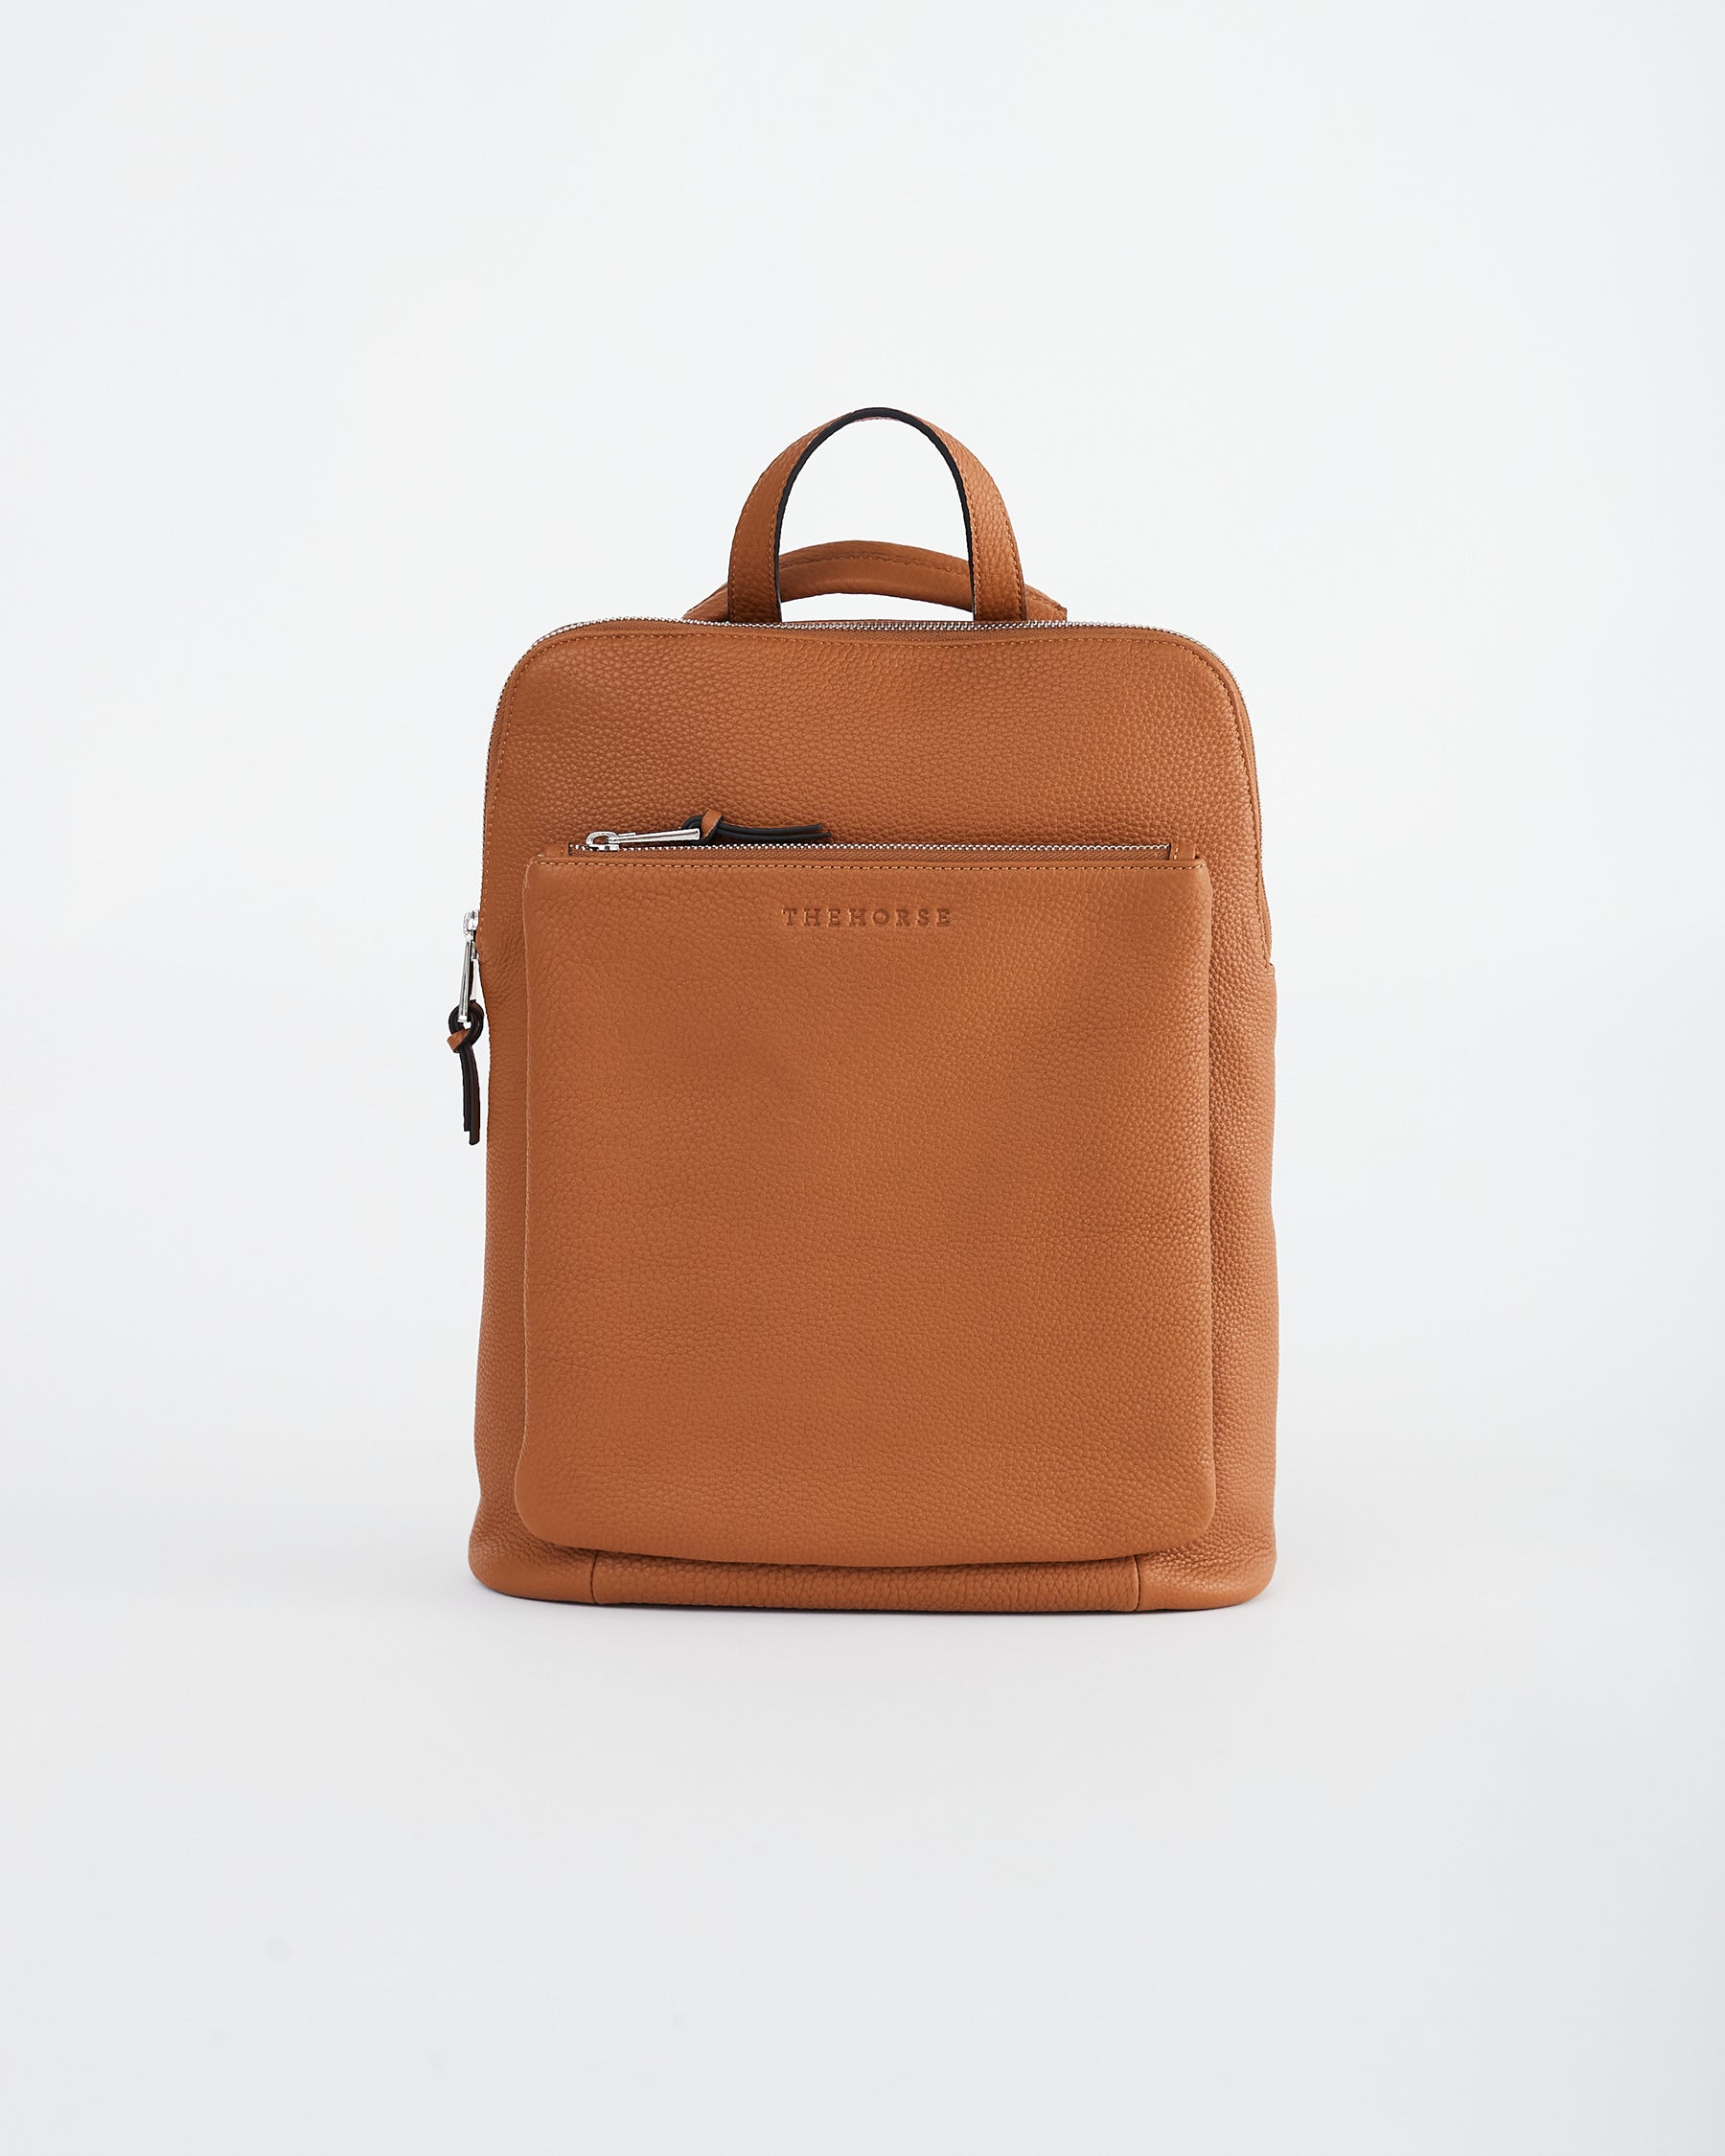 Backpack in Tan Leather by The Horse®